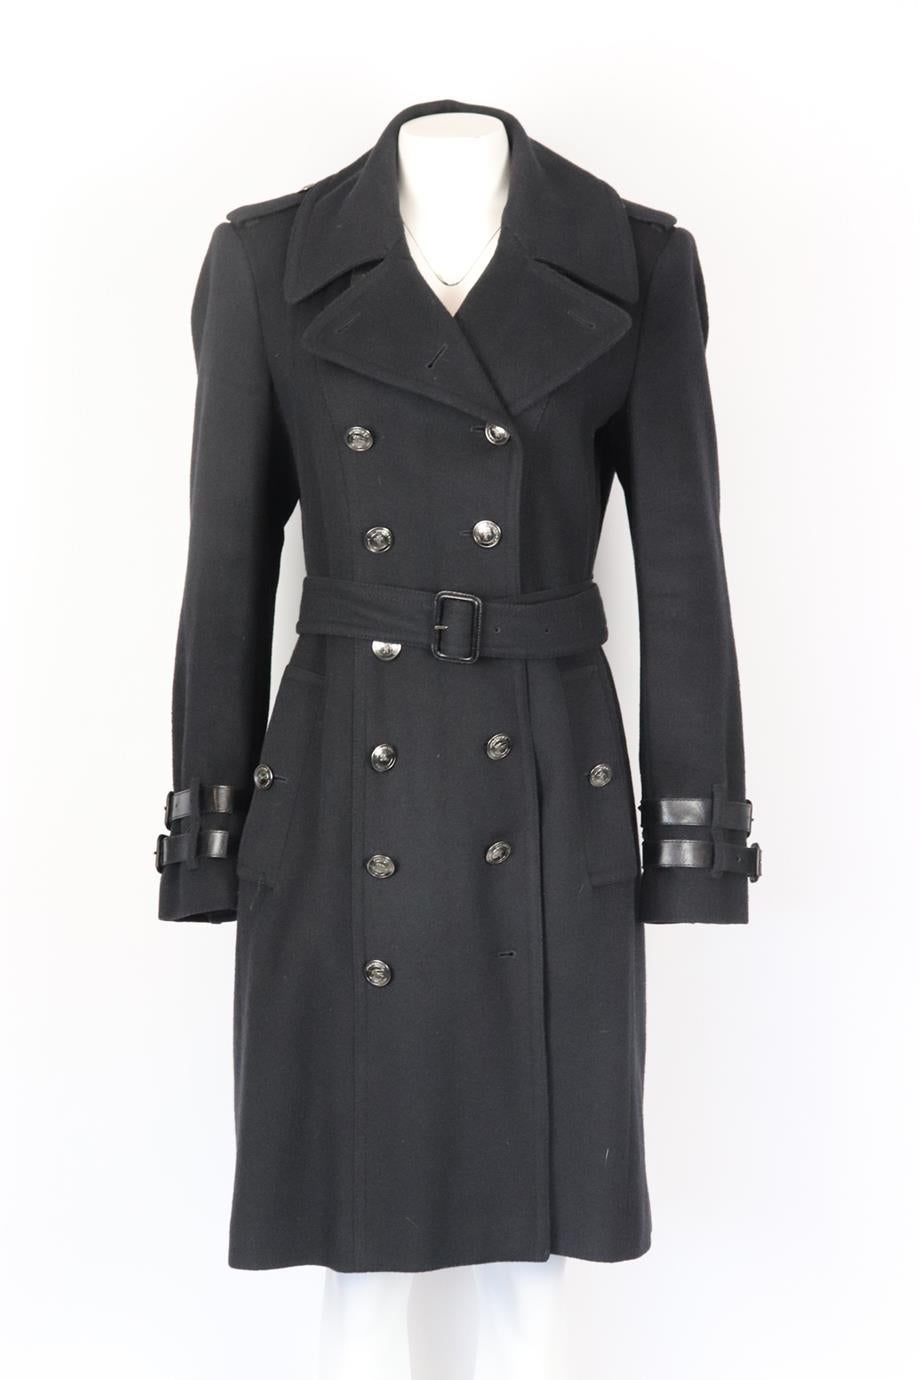 Burberry belted double breasted wool coat. Black. Long sleeve, crewneck. Button fastening at front. 80% Virgin wool, 20% cashmere; lining: 50% acetate, 50% viscose; leather trim: 100% leather. Size: UK 16 (US 12, FR 44, IT 48). Shoulder to shoulder: